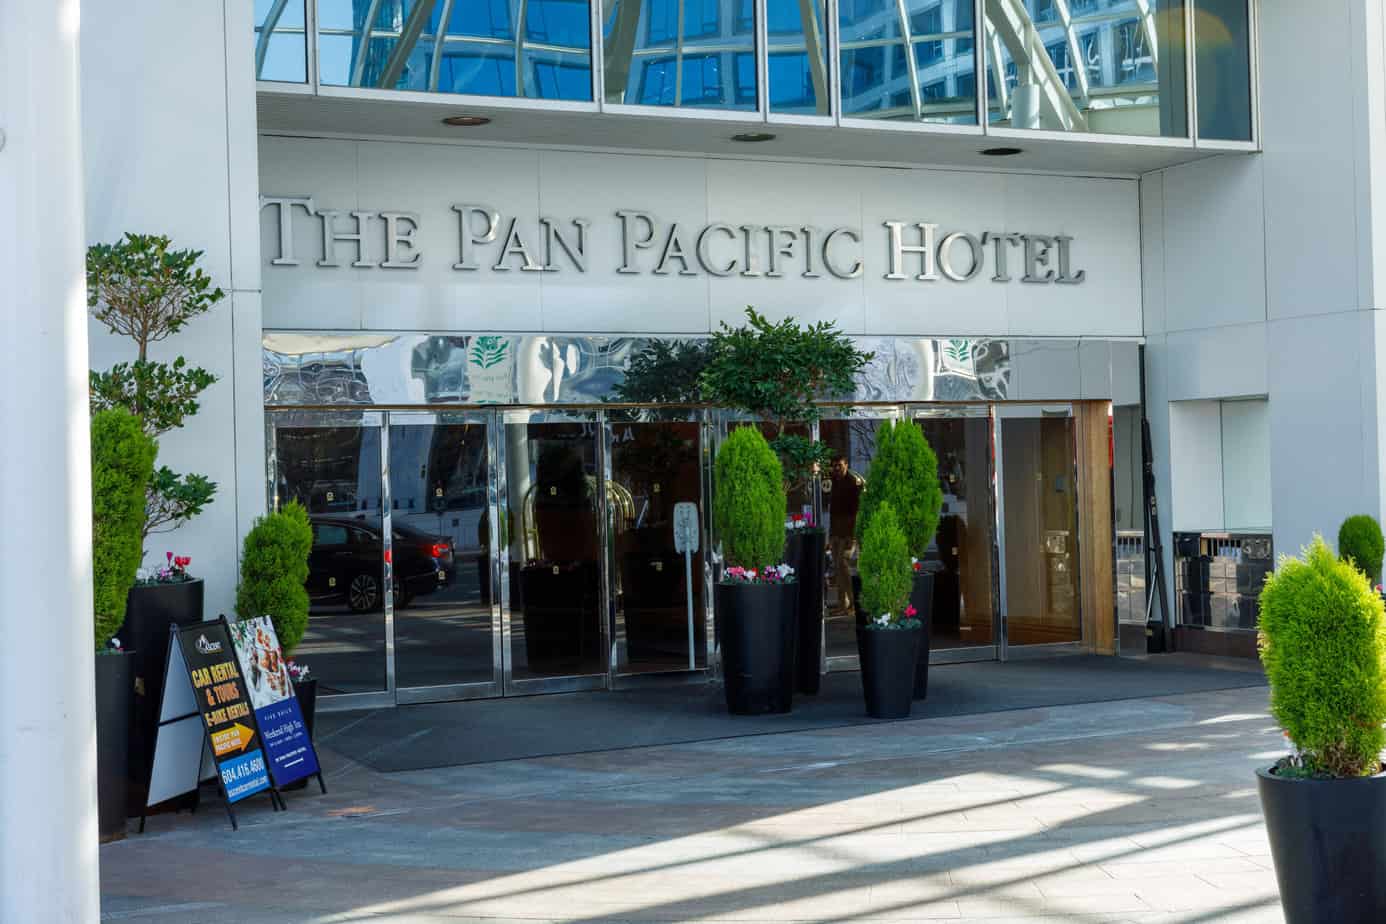 Front of the entrance of the "The Pan Pacific Hotel" glass doors underneath and potted bushes as  decor. The Pan Pacific Hotel has one of the best views from their outdoor pool.